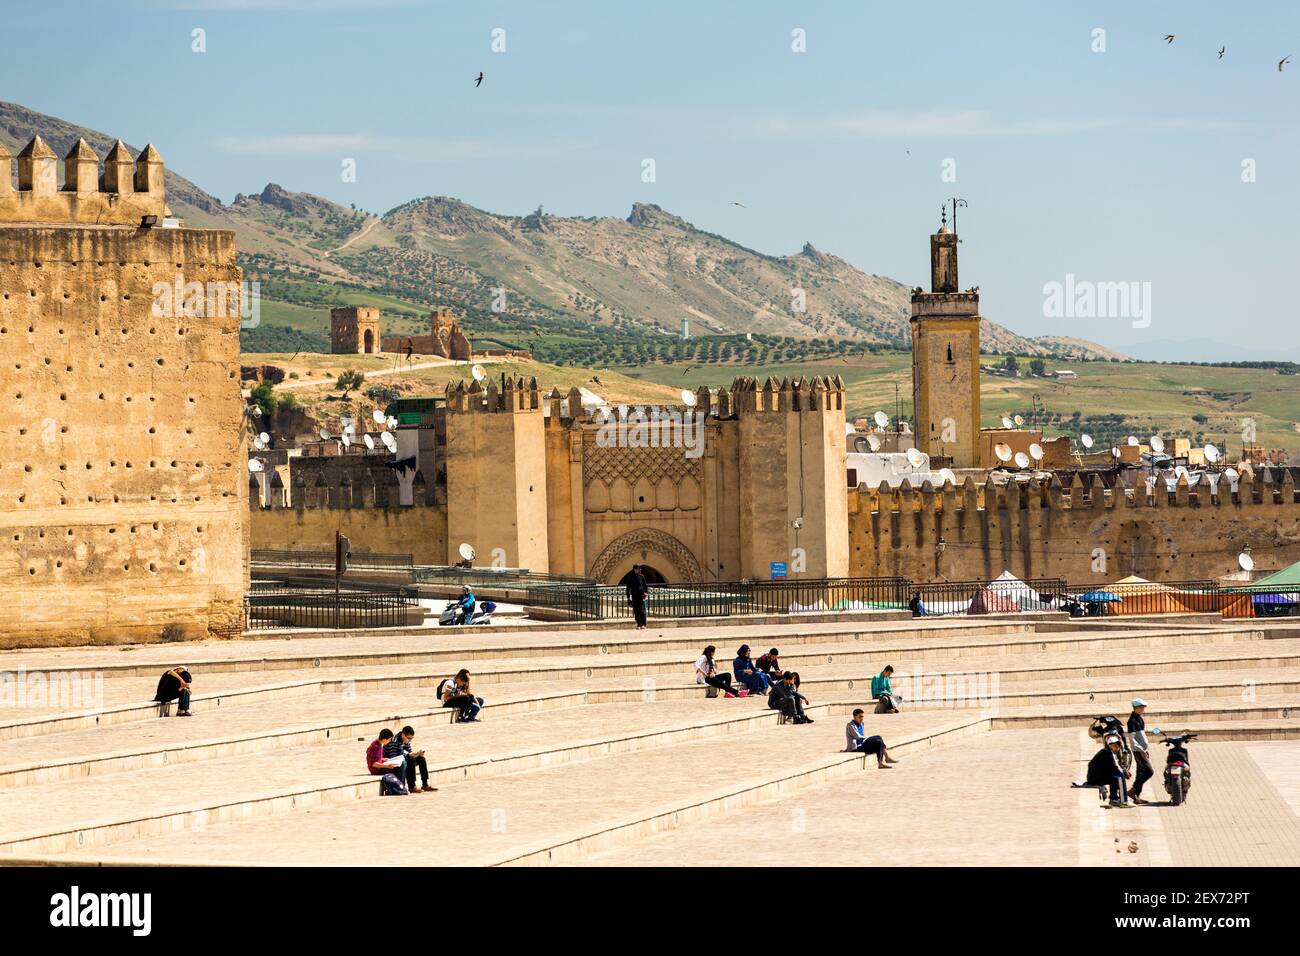 Morocco, Fez, ramparts or mechouar, surrounding the city built in the 17th century, with people sitting in an open square Stock Photo